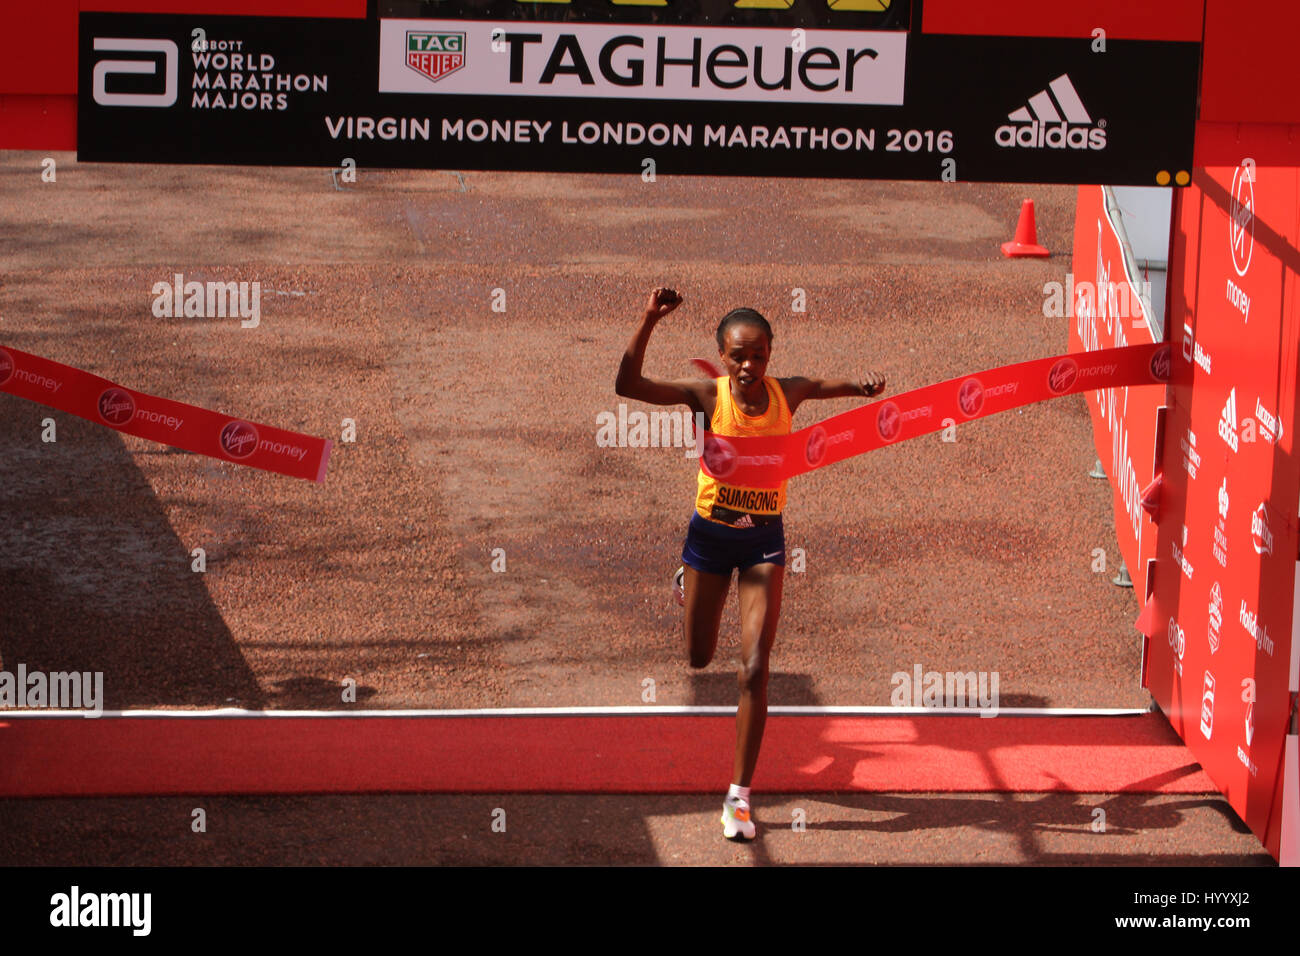 London, UK 24 April 2016. Jemima Sumgong (Kenya) wins the Virgin Money London Marathon in a time of 2:22:58. The London Marathon’s one millionth finisher will cross the line during this years race, a milestone in the history of the race that started in 1981. The men's course records is 2:04:29 (2014), held by Wilson Kipsang and women's: 2:15:25 (2003) held by Paula Radcliffe. © David Mbiyu/Alamy Live News Stock Photo